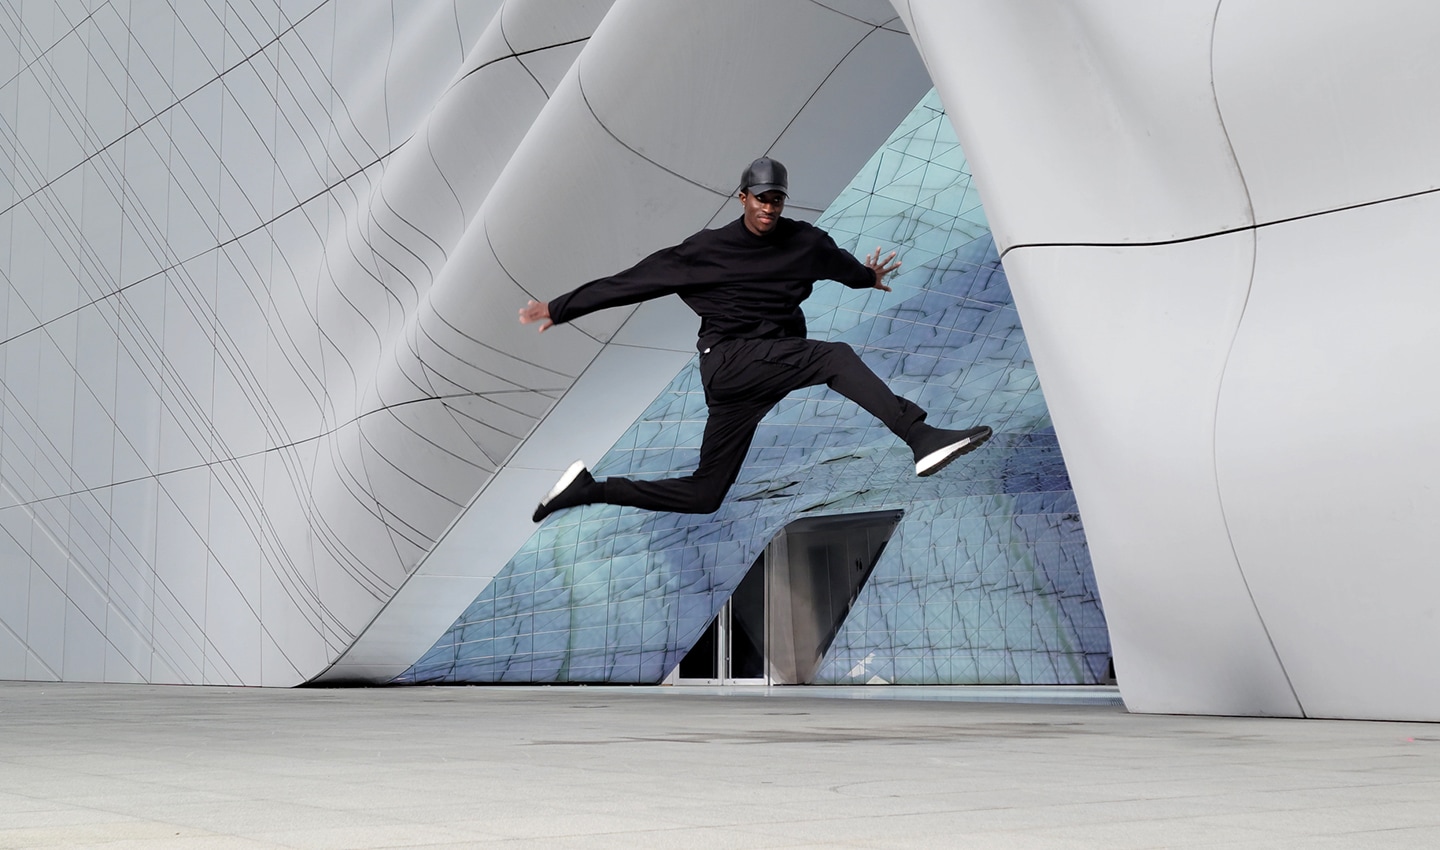 Scene of a man dancing in front of an architectural structure, shot with 8K on Galaxy S21 Ultra 5G. A still image is taken from the video using 8K Video Snap. The image shows how crisp a frame from 8K video looks as a photo.